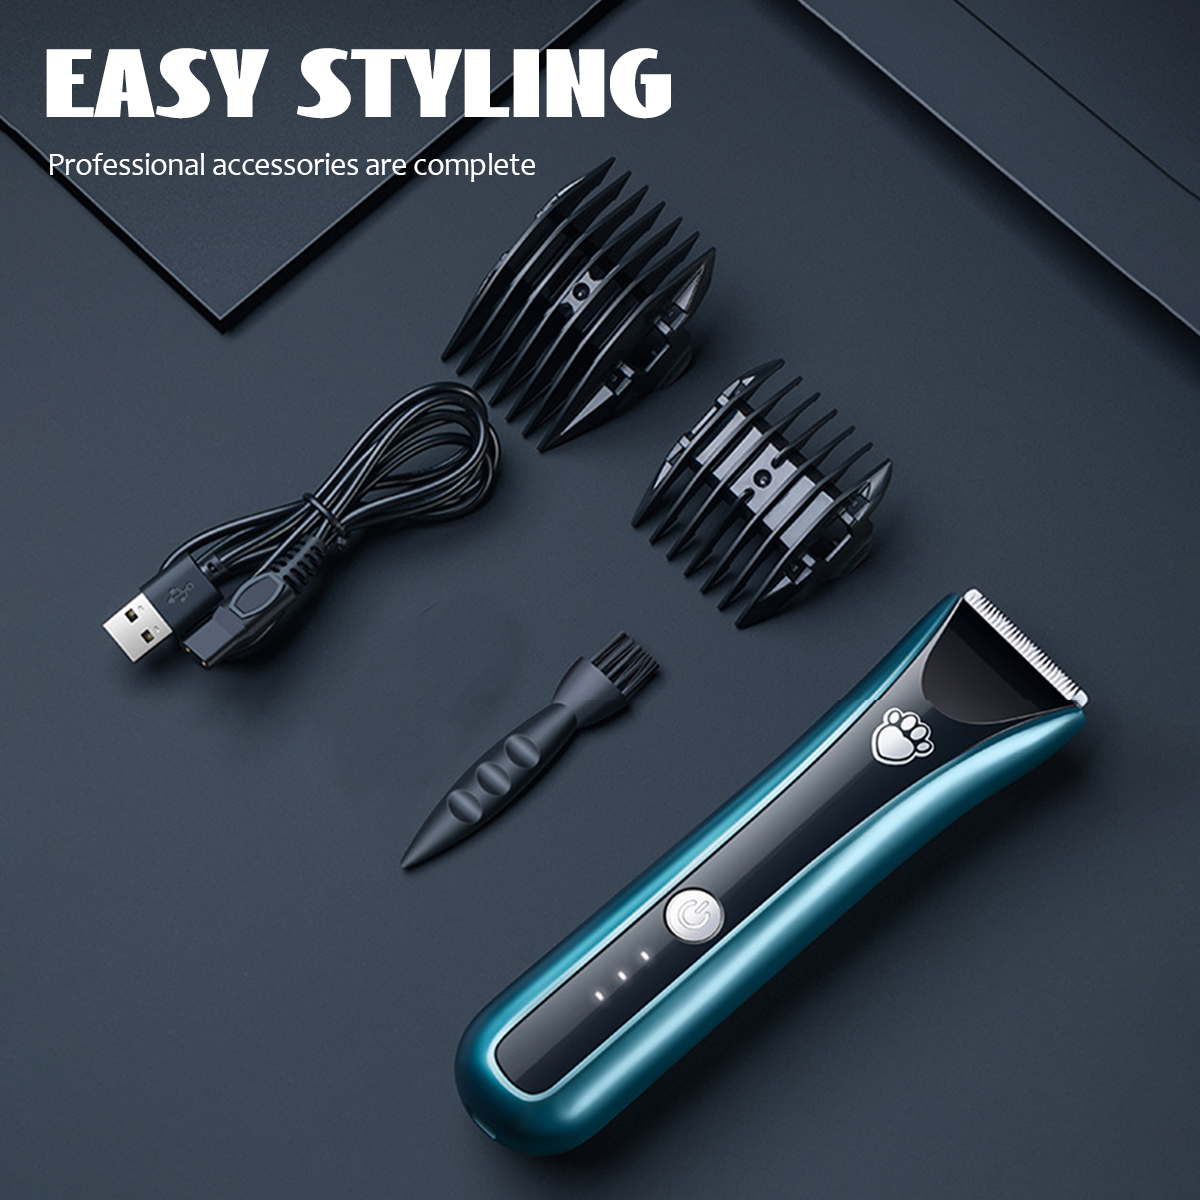 5W-Professional-Pet-Dog-Cat-Animal-Clippers-Hair-Grooming-Cordless-Trimmer-Shaver-USB-Charging-1958814-2